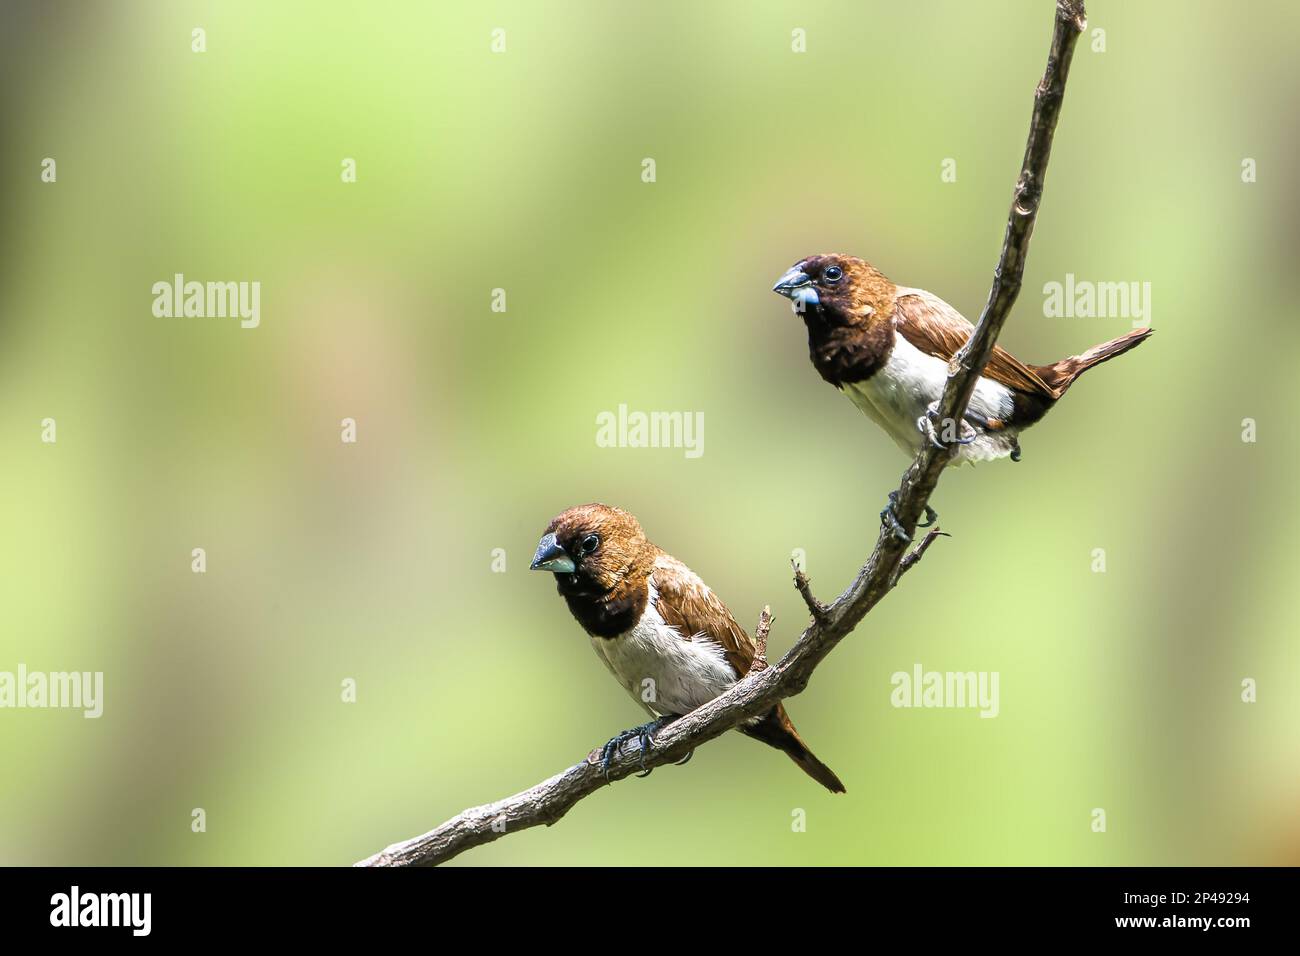 Two birds of the type Estrildidae sparrow or estrildid finches perched on a branch on a sunny morning, background in the form of blurred green leaves Stock Photo